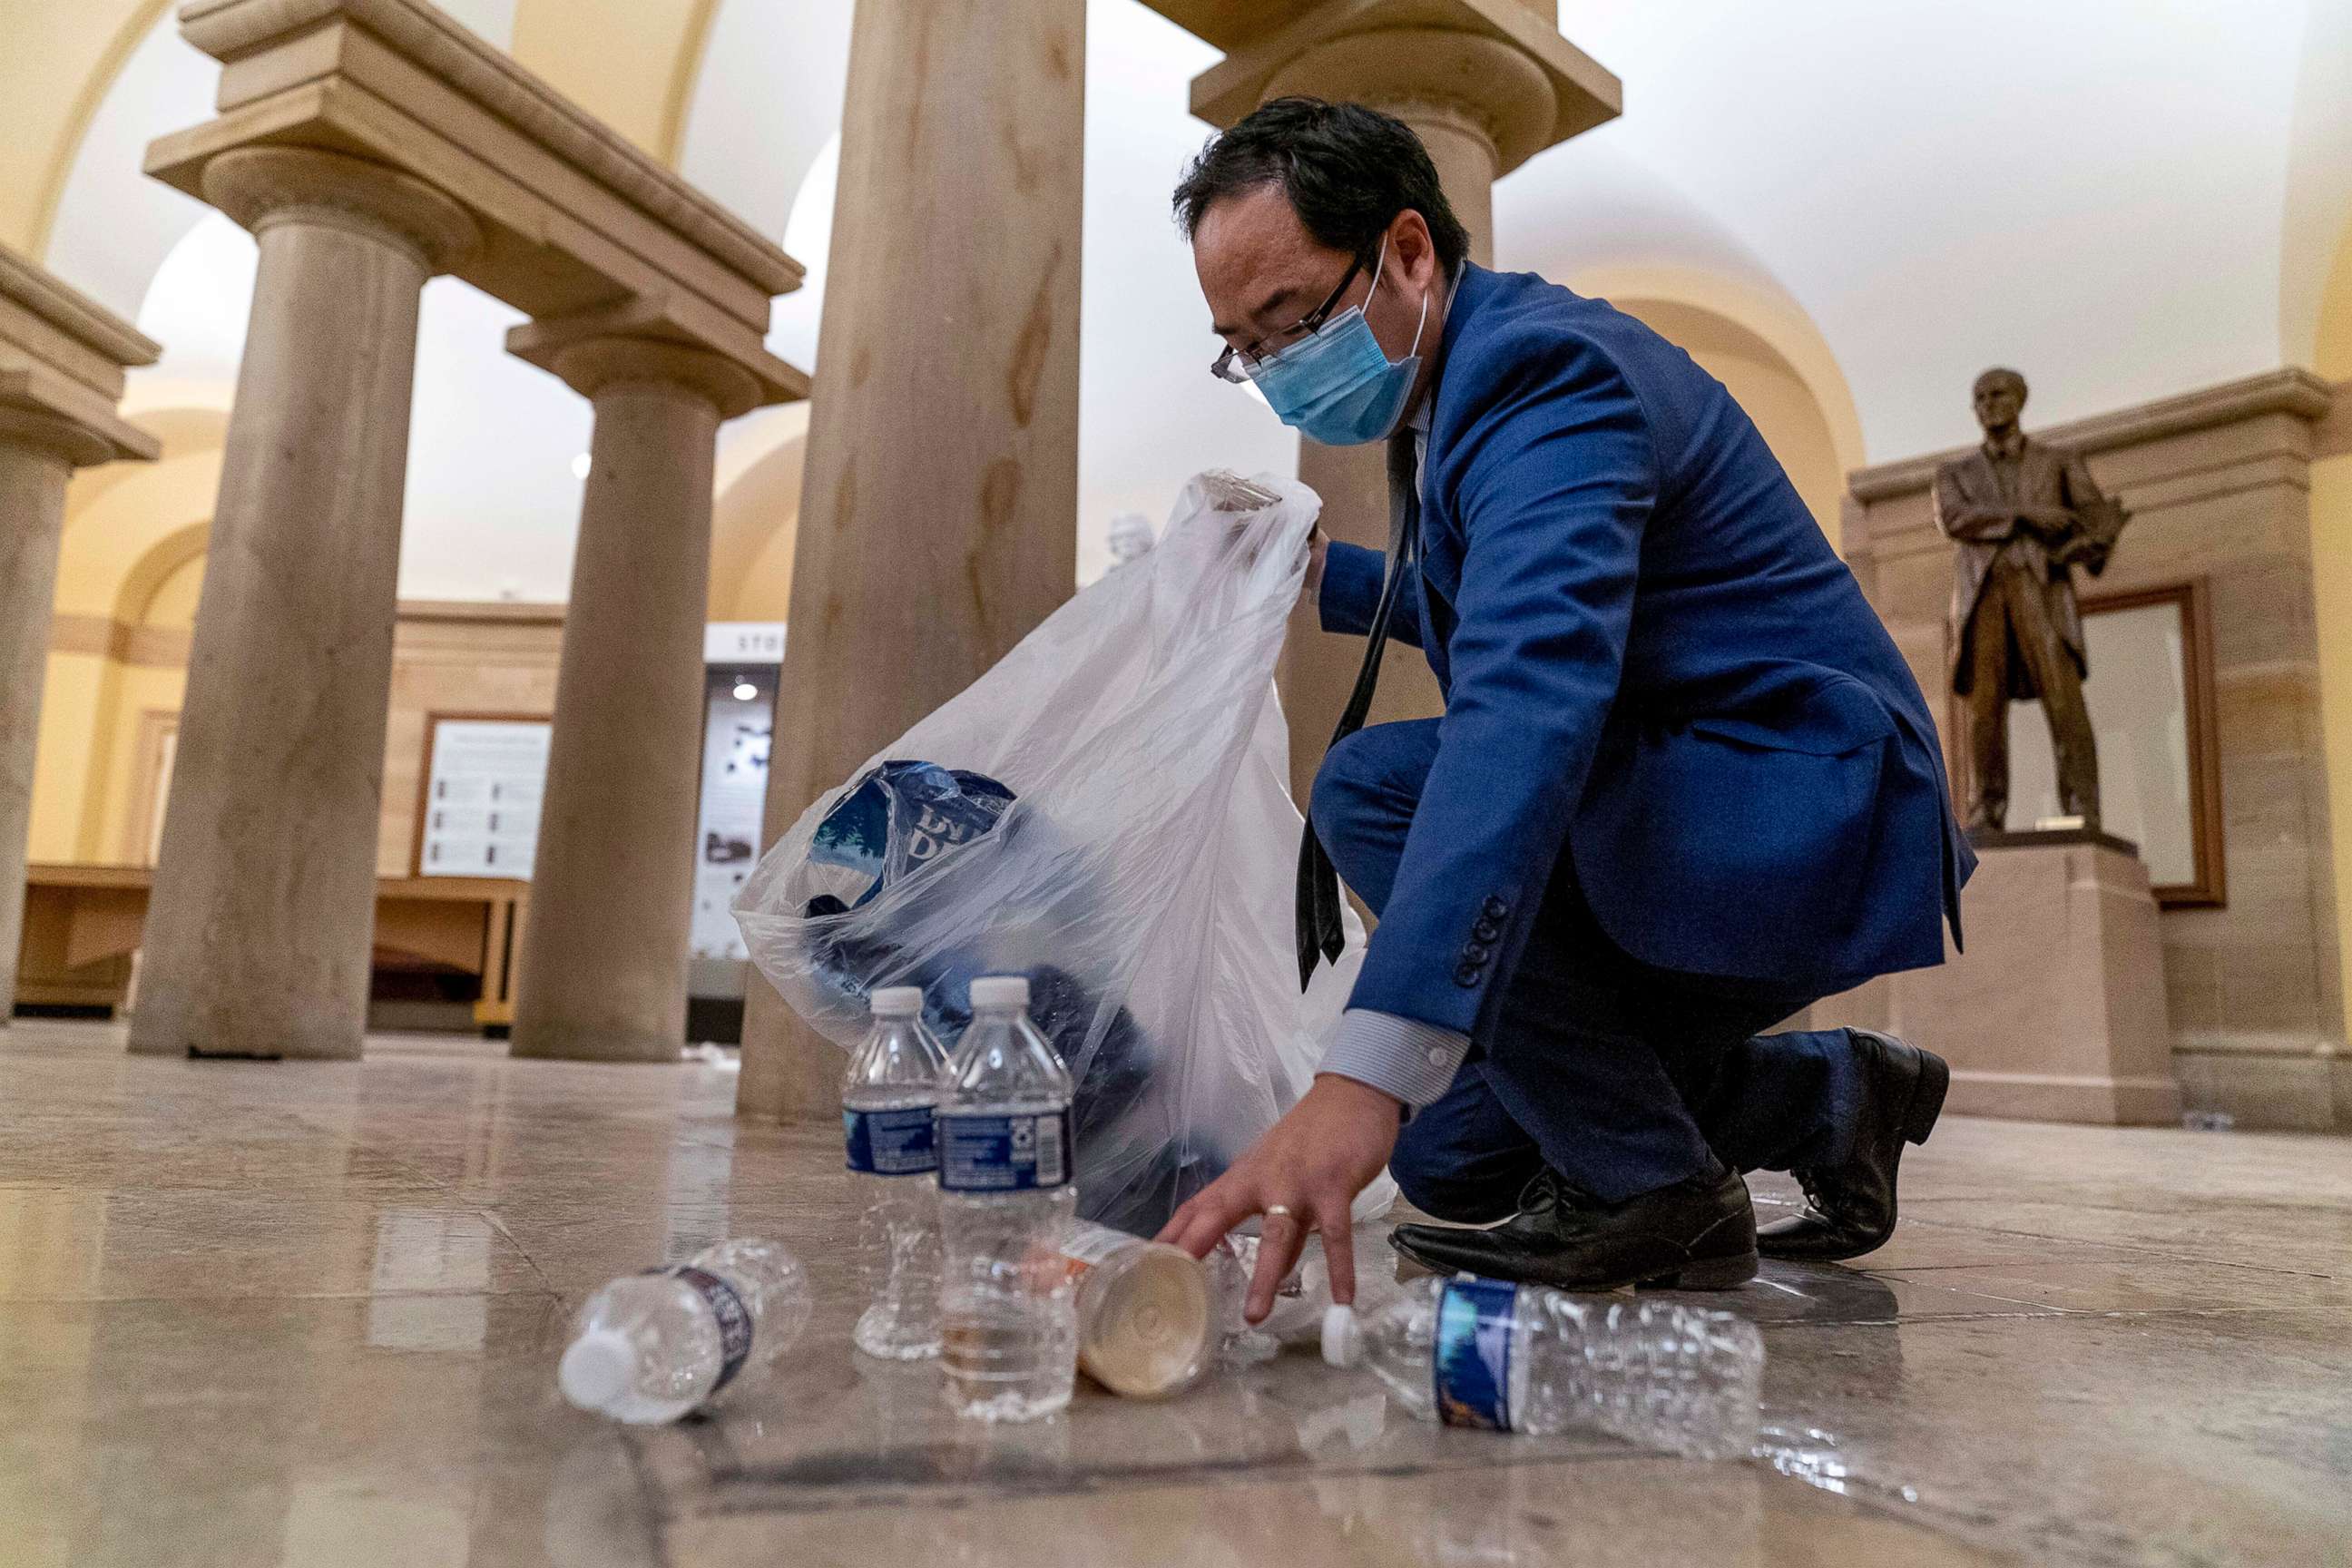 PHOTO: Rep. Andy Kim, Democrat from New Jersey, cleans up debris and trash strewn across the floor in the early morning hours, Jan. 7, 2021, after protesters stormed the Capitol in Washington, D.C., the day before.